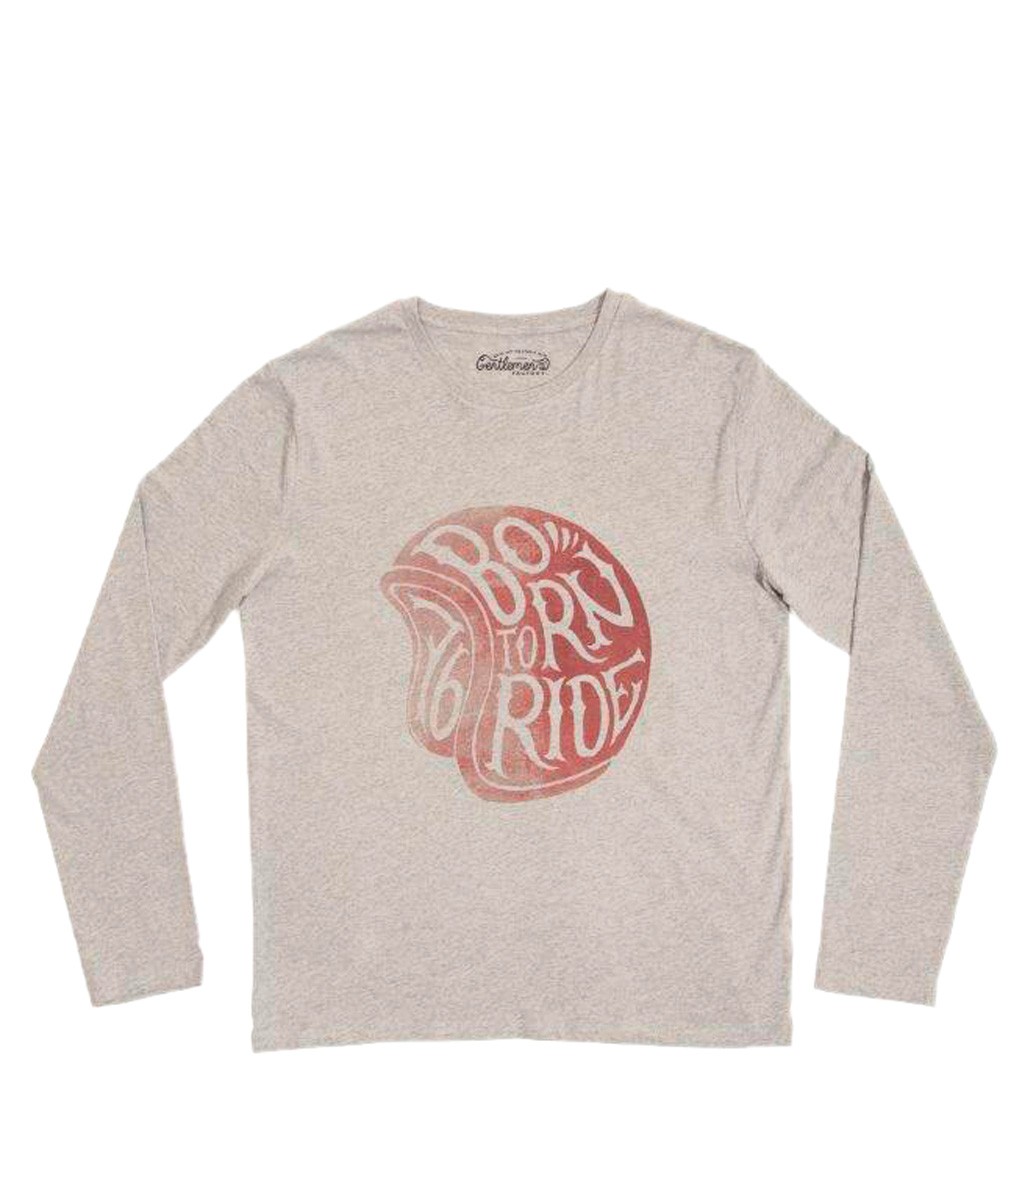 T-shirt born to ride manches longues gris taille l